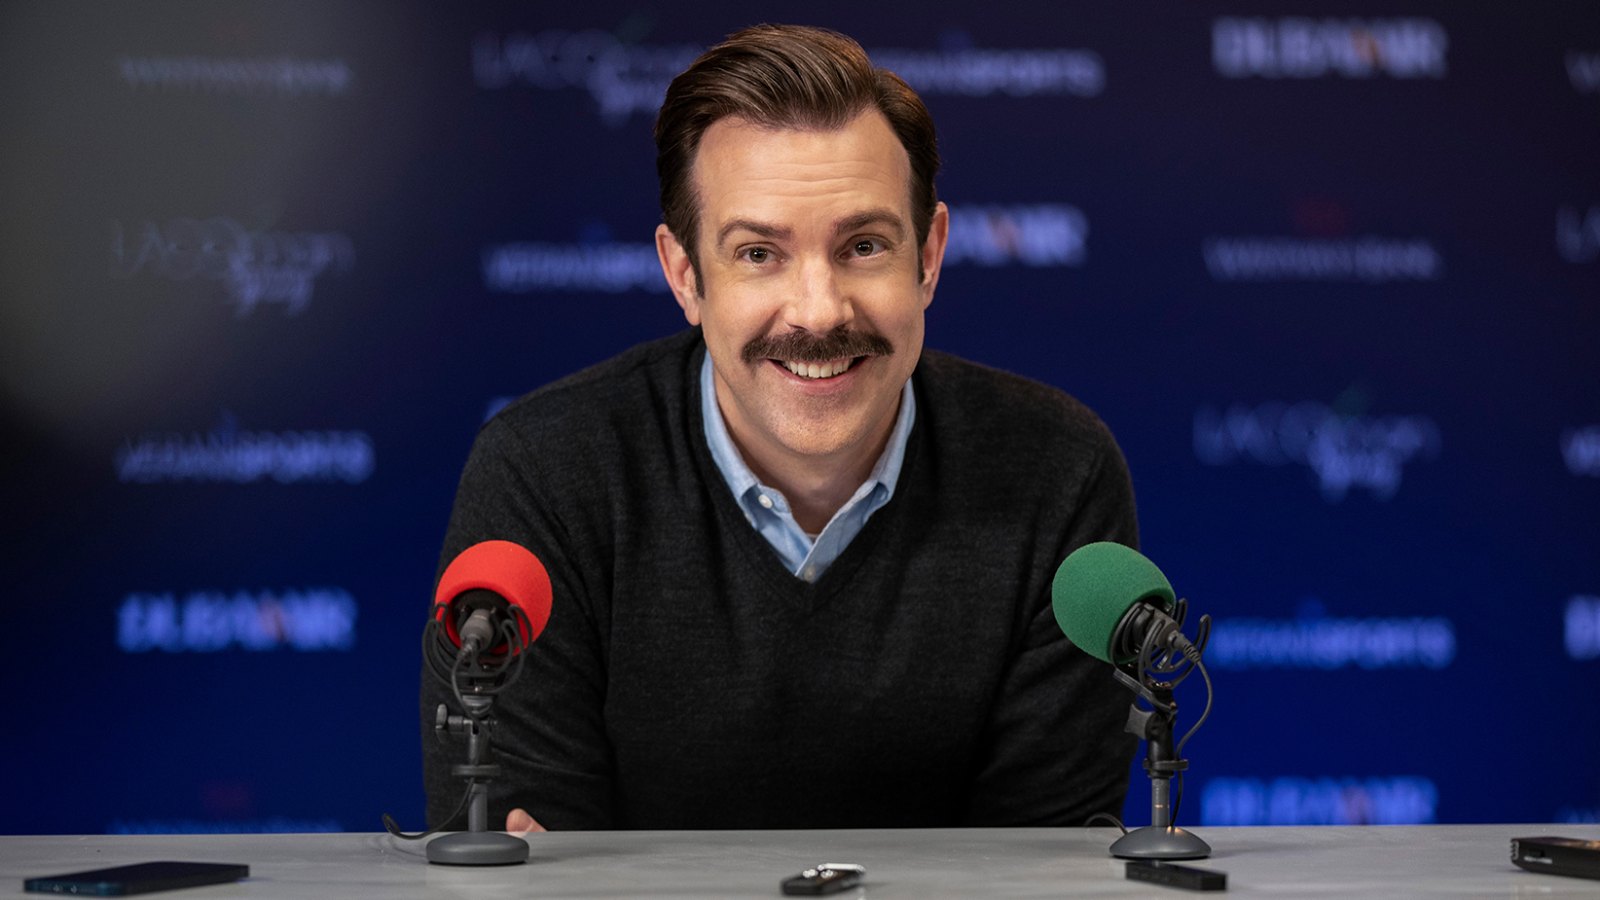 Listener Numbers, Contacts, Similar Podcasts - Jason Sudeikis and